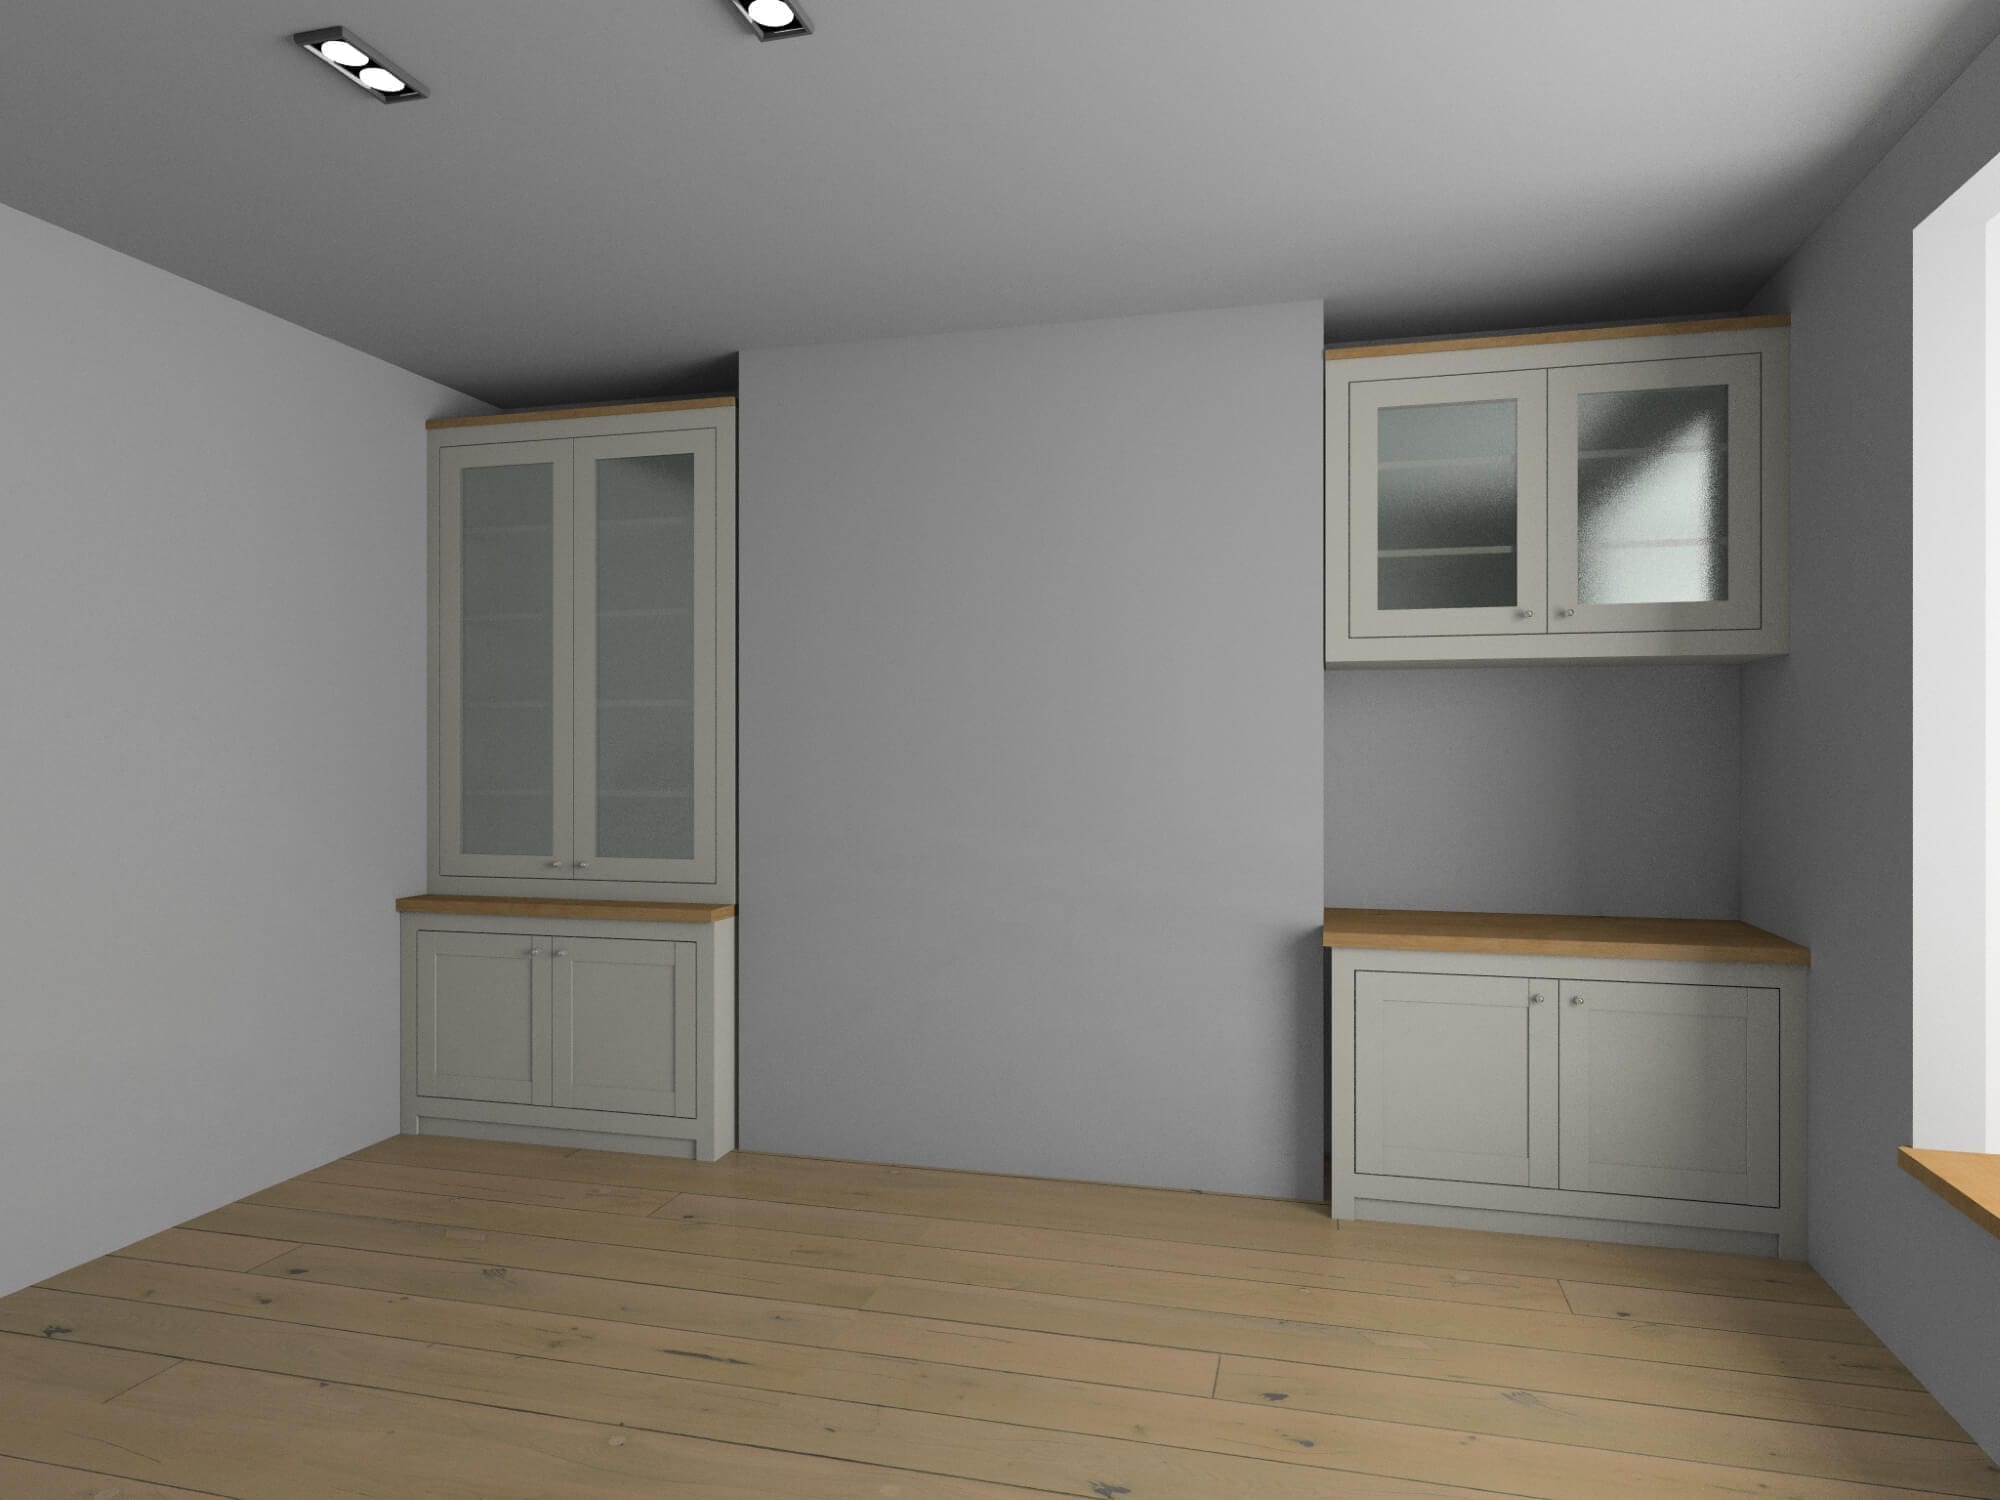 Alcove project rendering